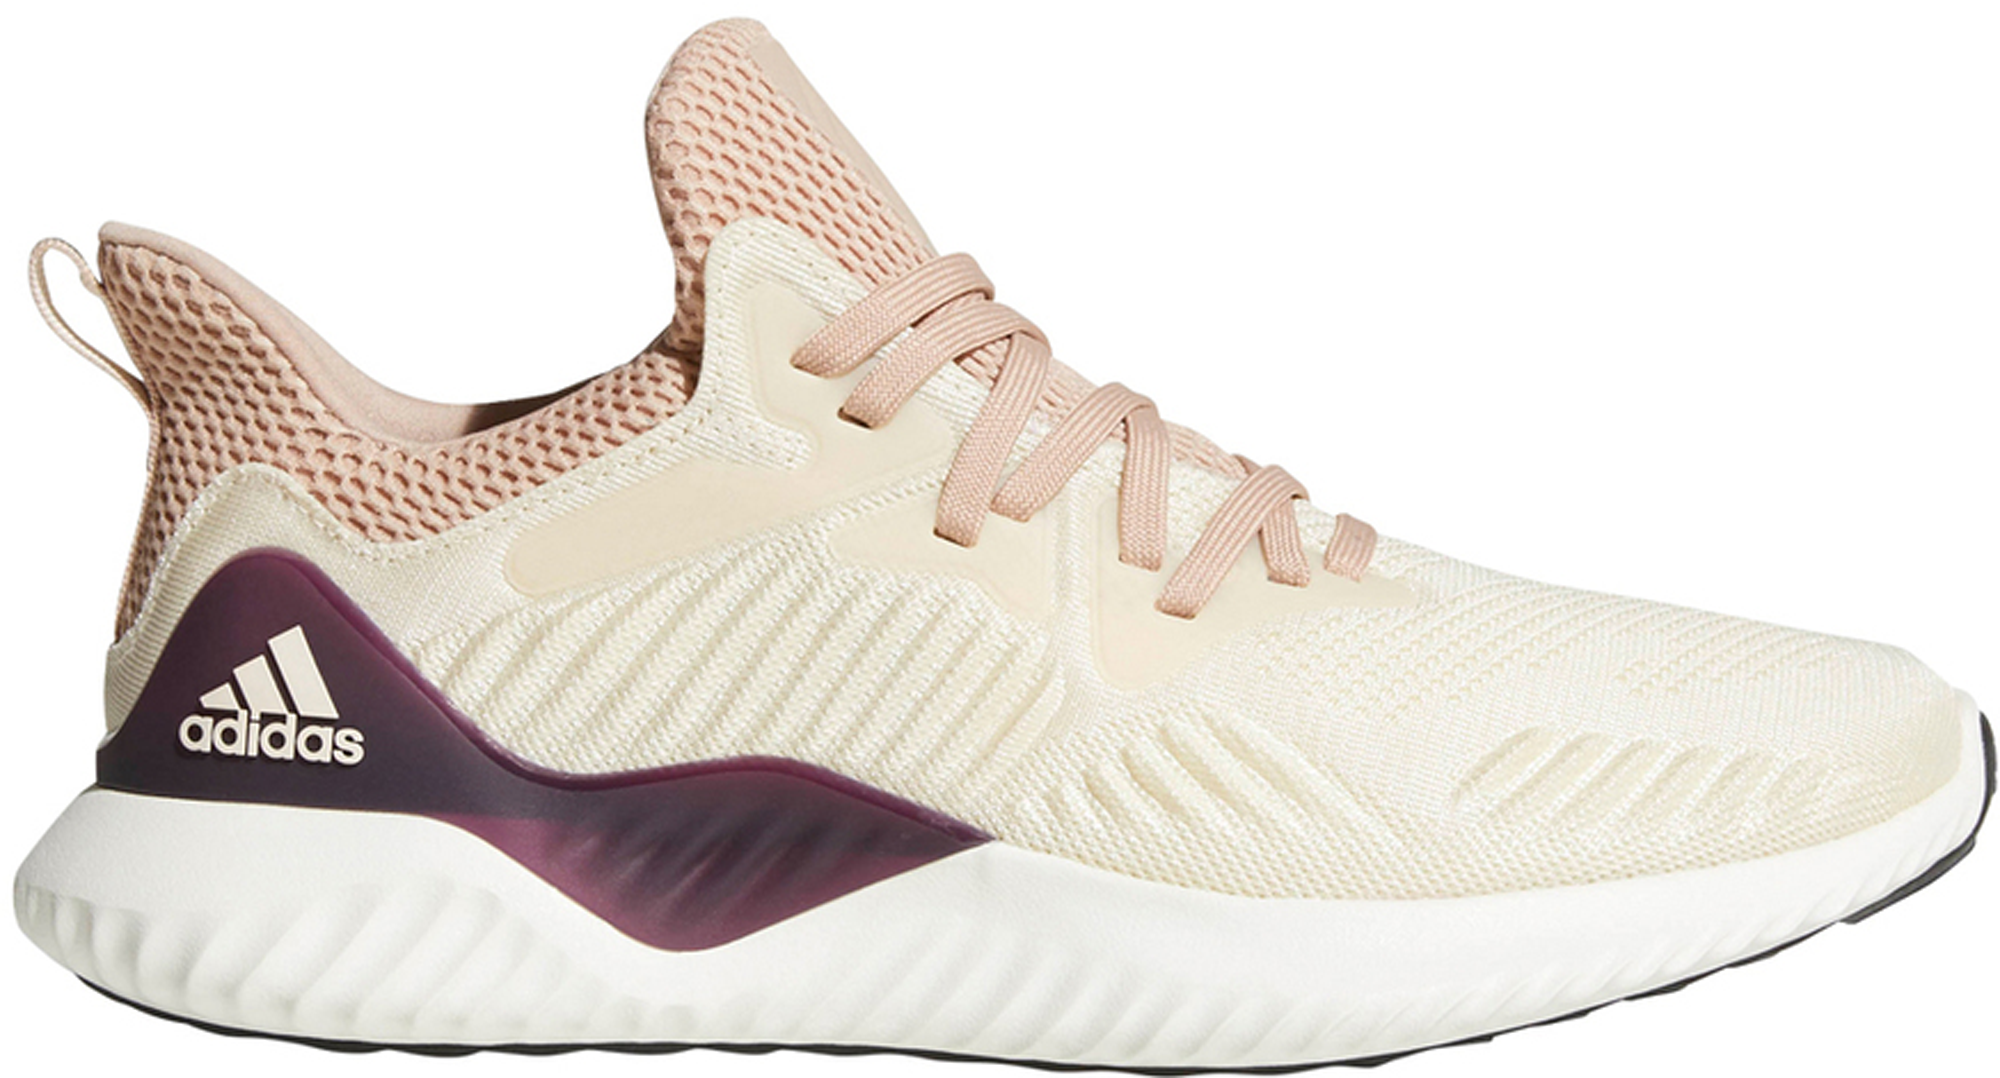 alphabounce beyond wc